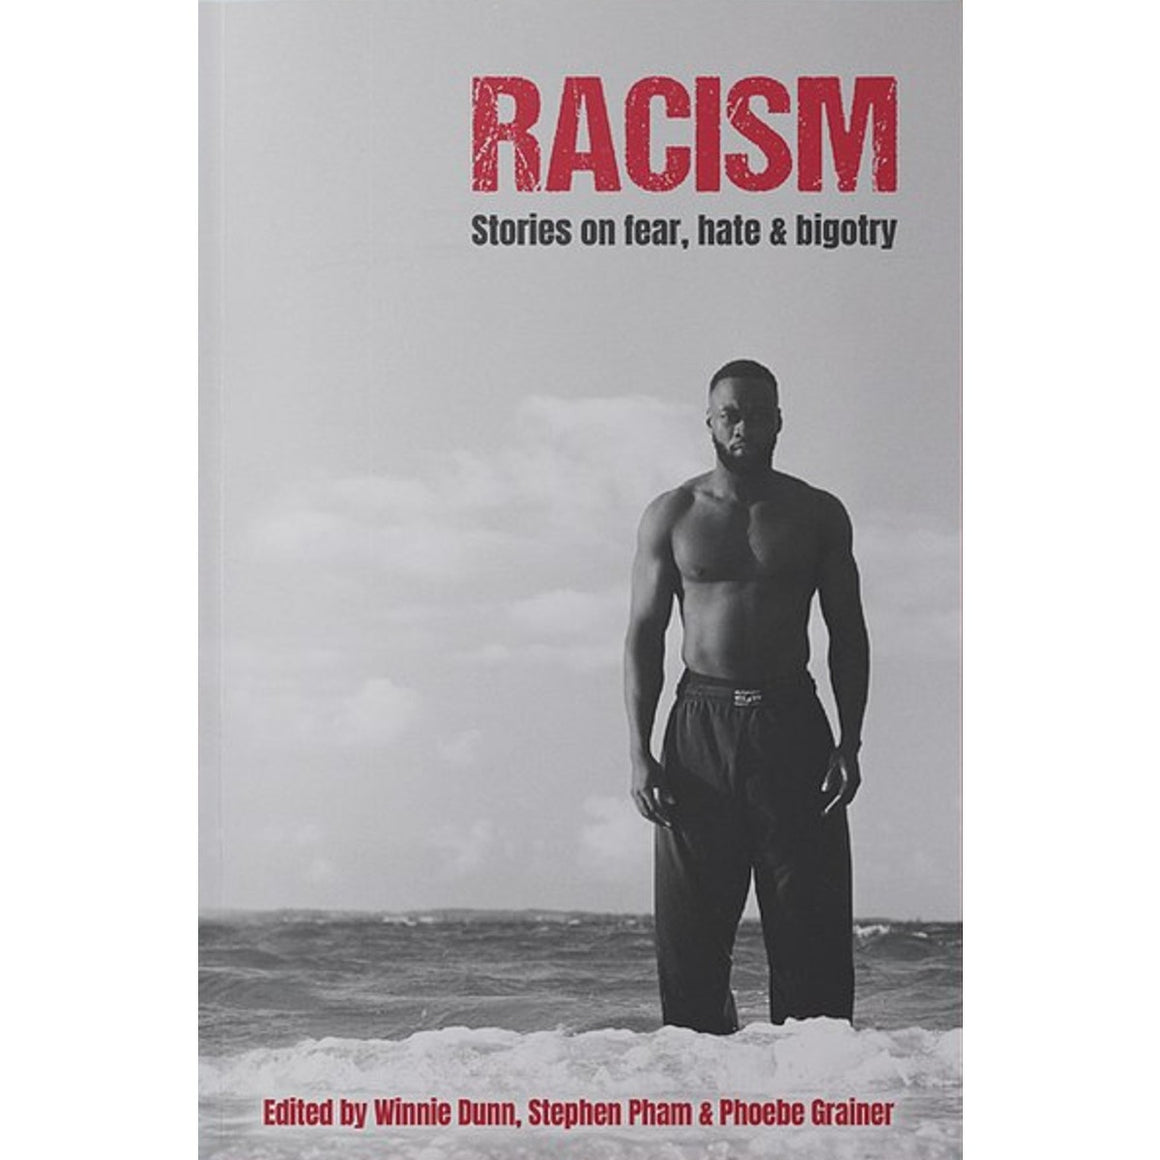 Image of book cover featuring black and white photograph of a shirtless man standing in the beach waves.